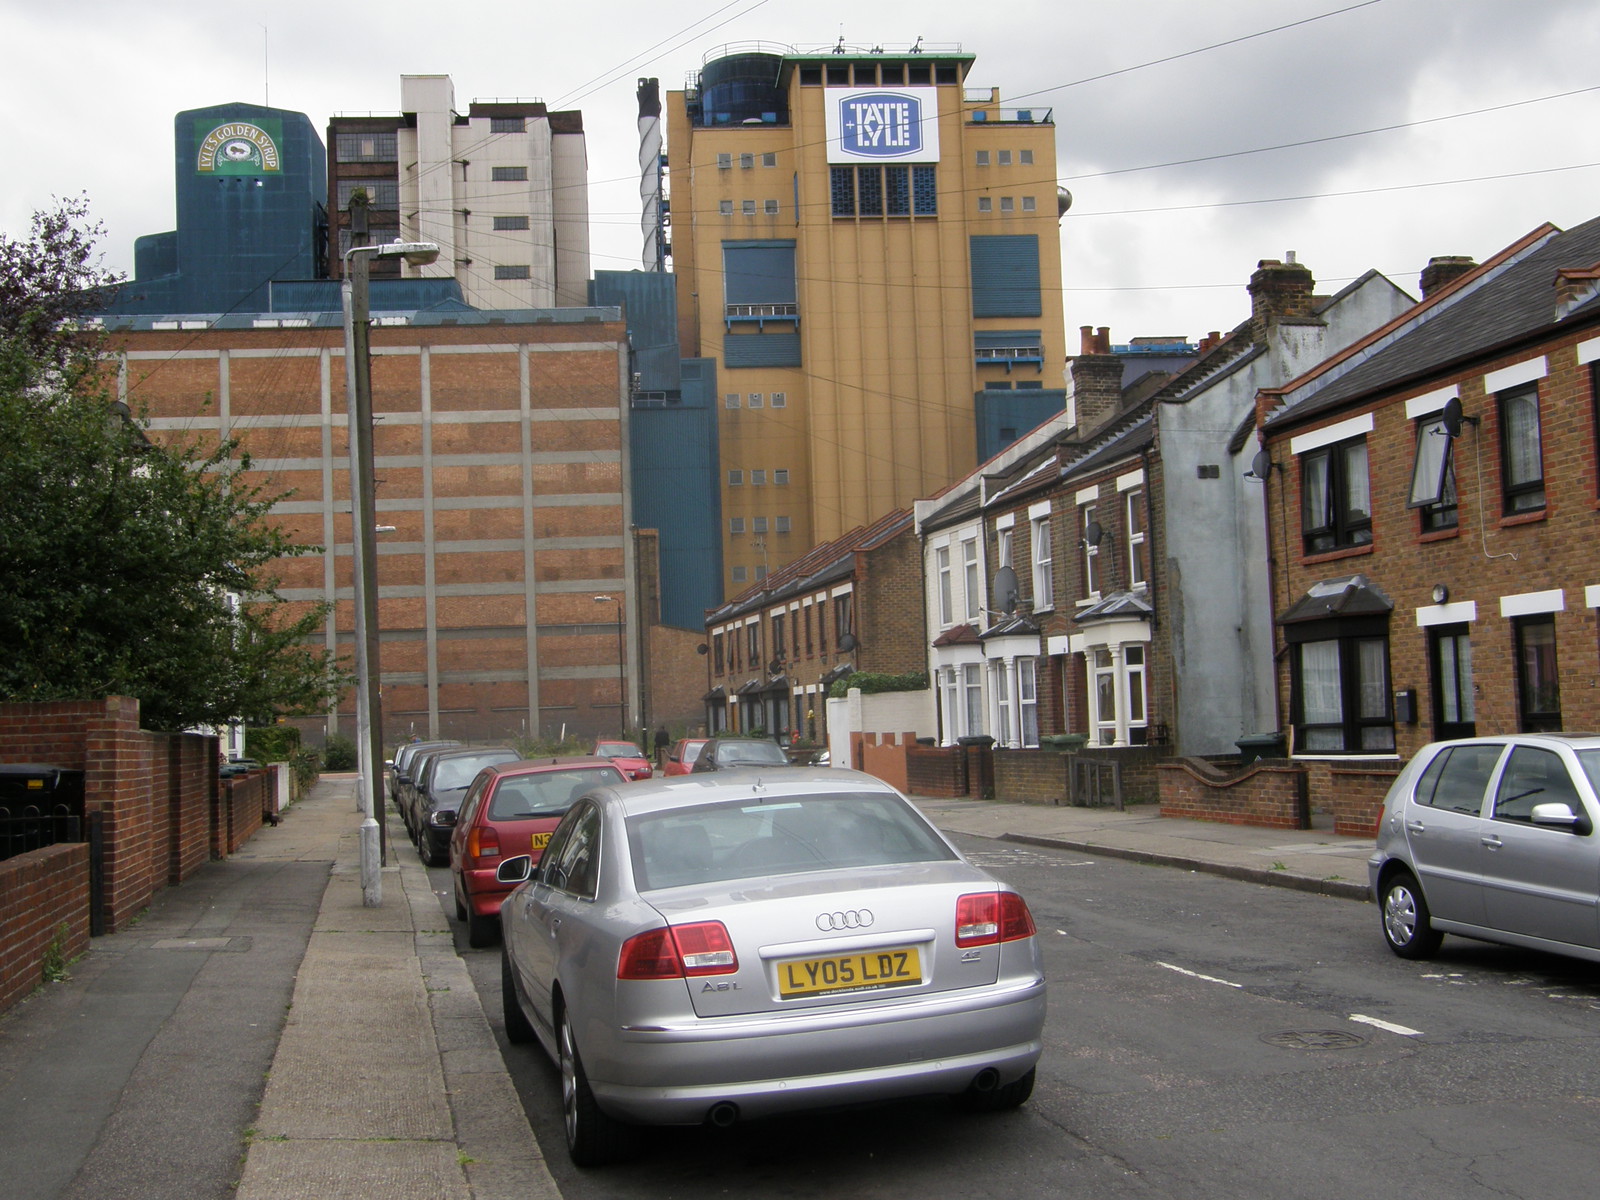 Houses between the Tate and Lyle factory and London City Airport